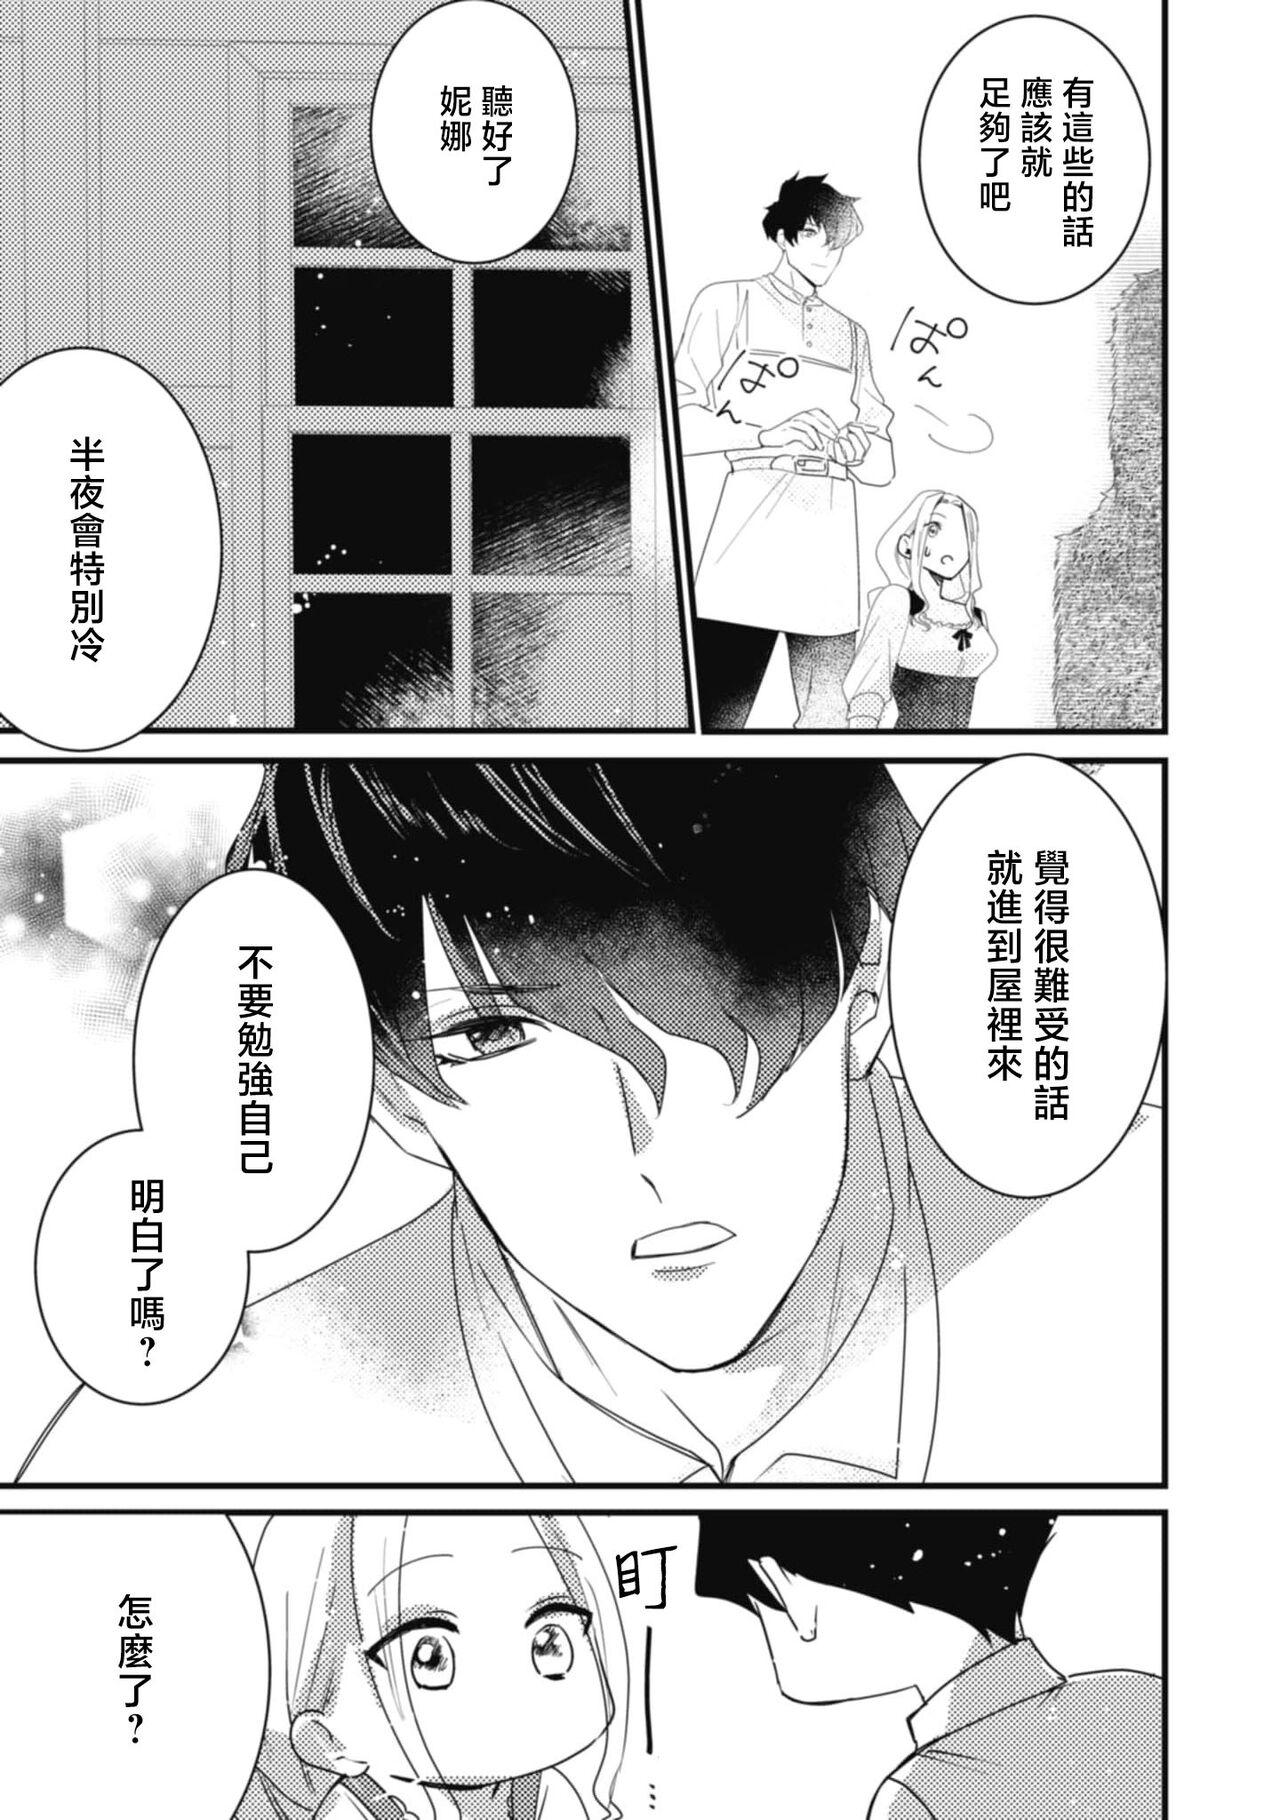 A shepherd in love with a demoted knight | 与被贬骑士相爱的牧羊女1 23